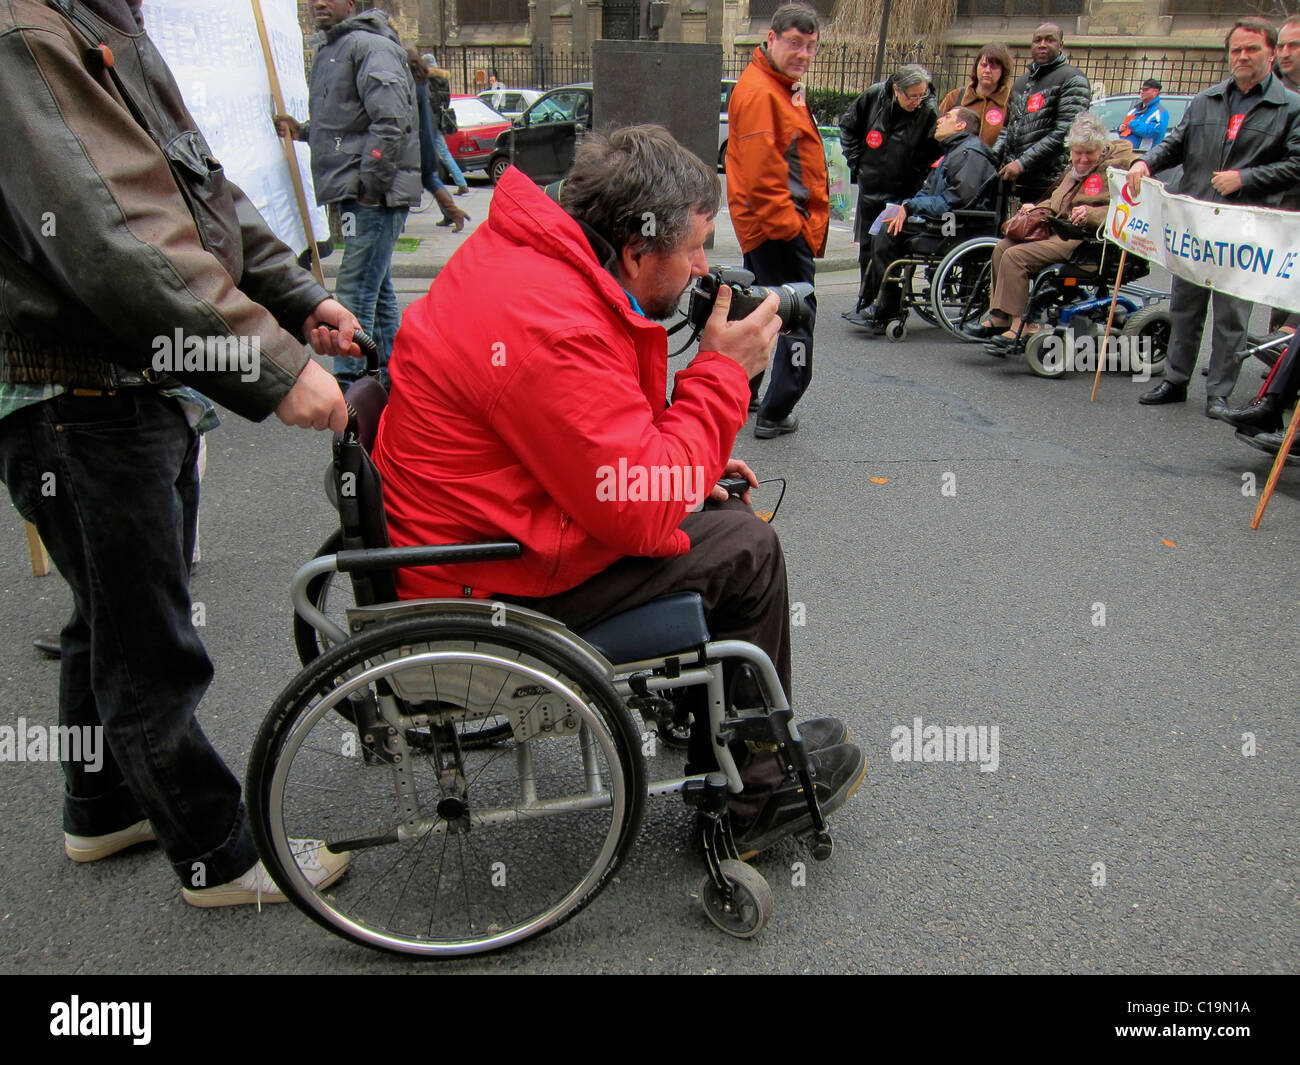 Paris, France, Handicapped Man, Photographer, Taking Pictures at Public Demonstration Protesting Against Forced Housing Expulsions, in Wheelchairs photographer protests Stock Photo